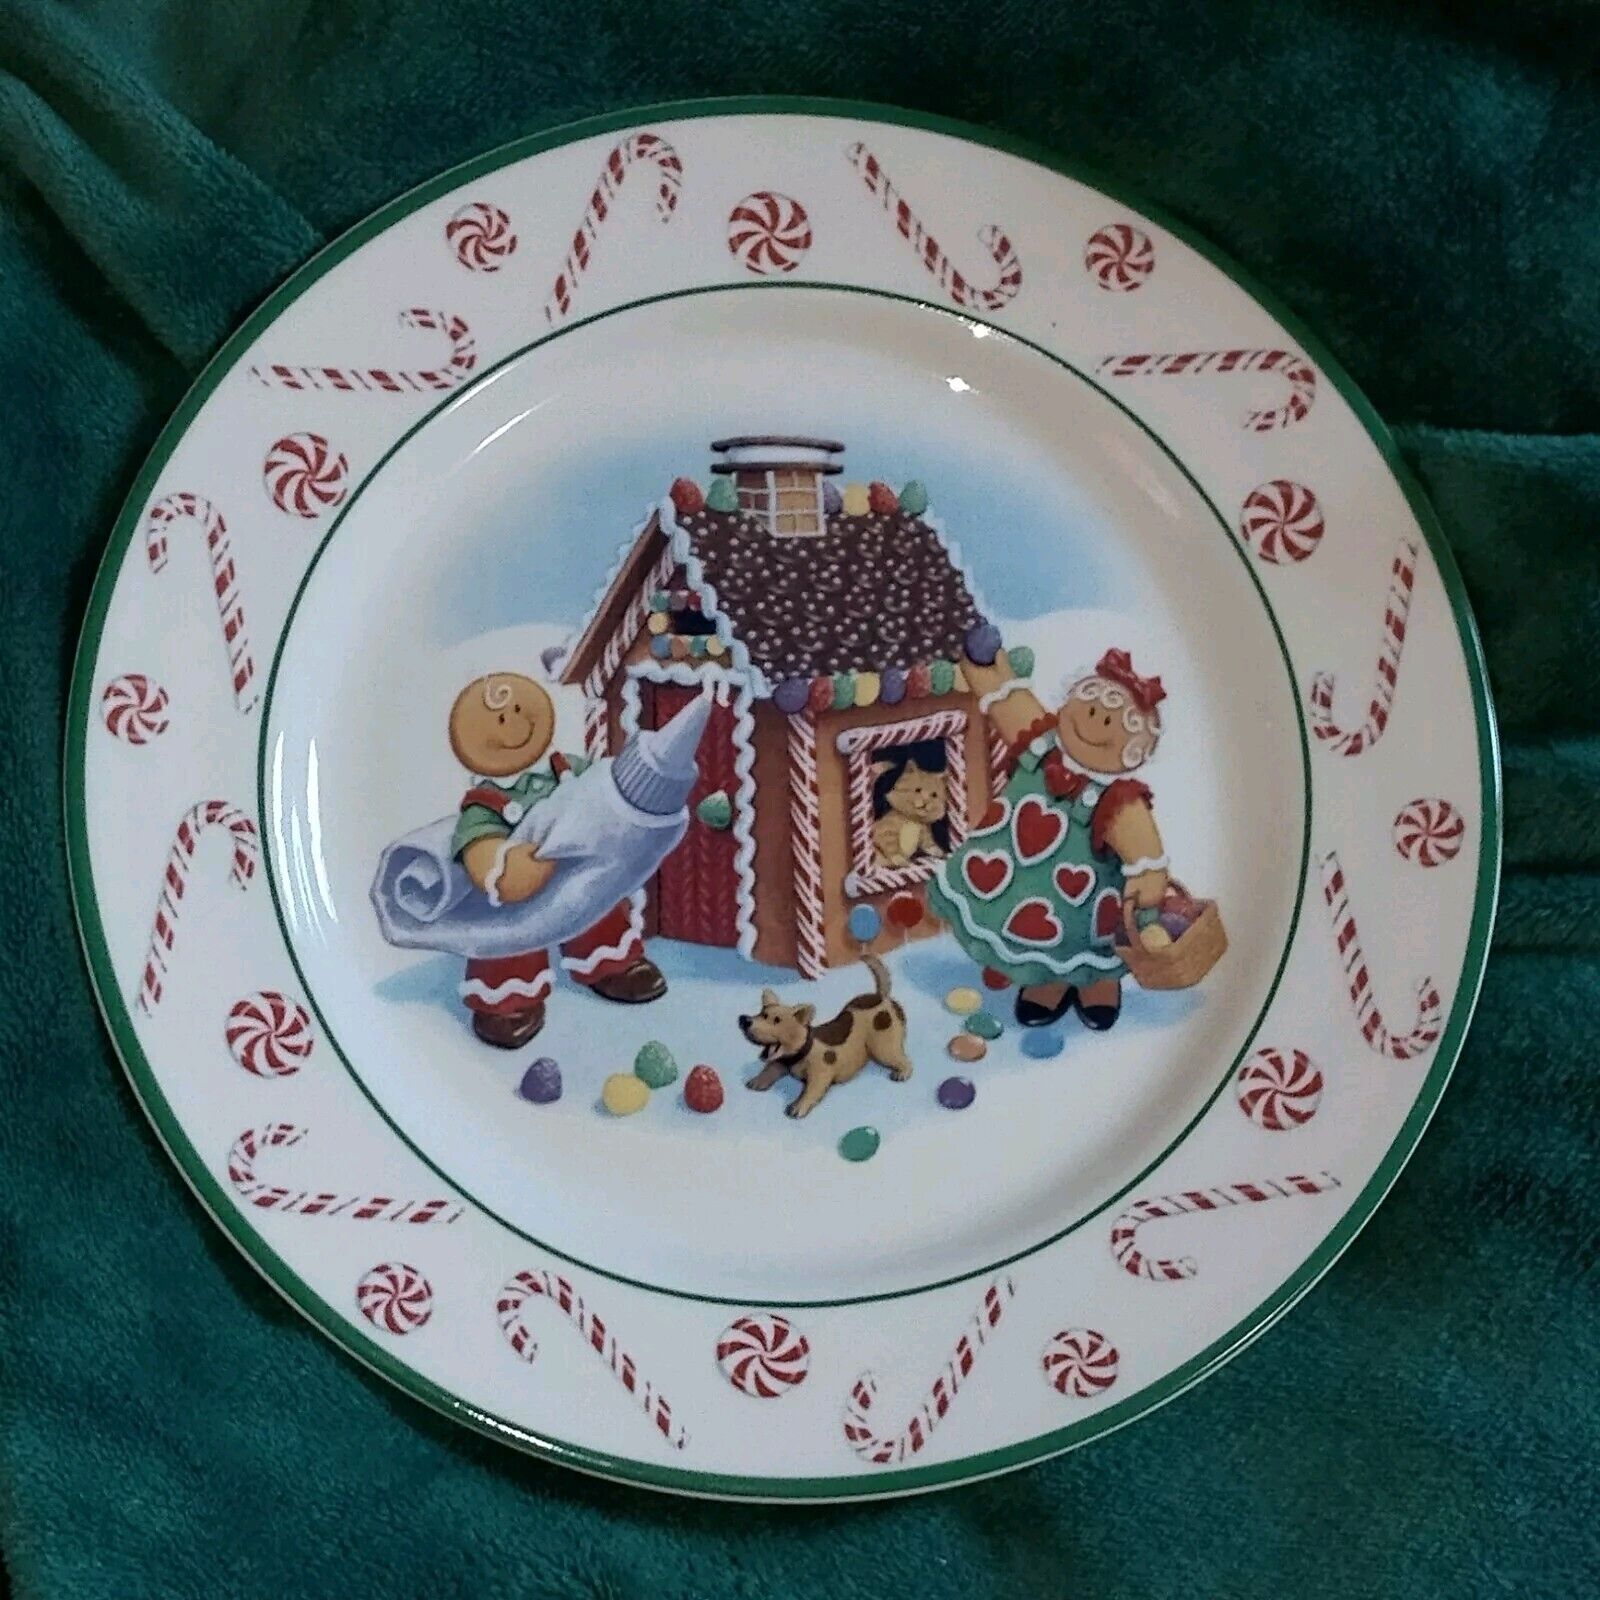 Longaberger Holiday Plate 2000 Roger and Ginger Bread House Candy Canes 